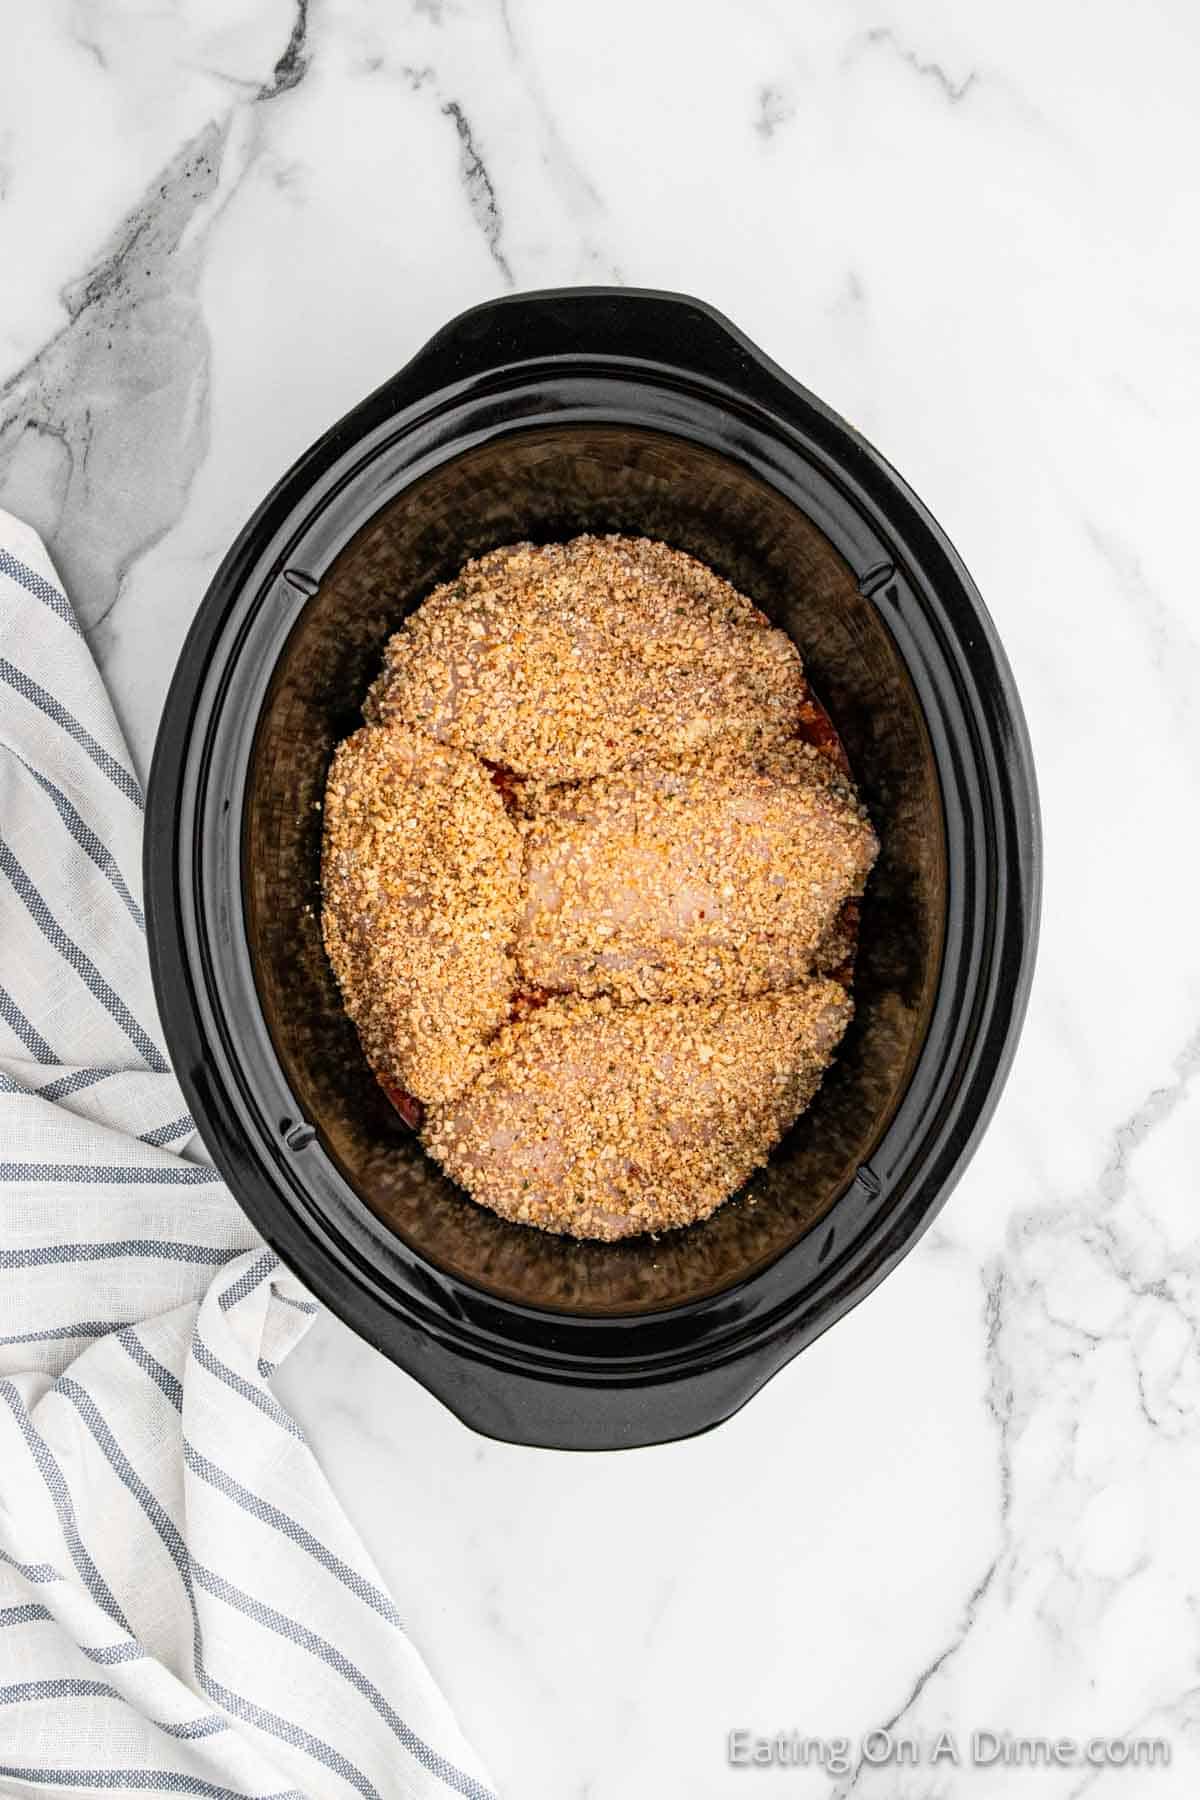 Placing the coated chicken breast in the slow cooker